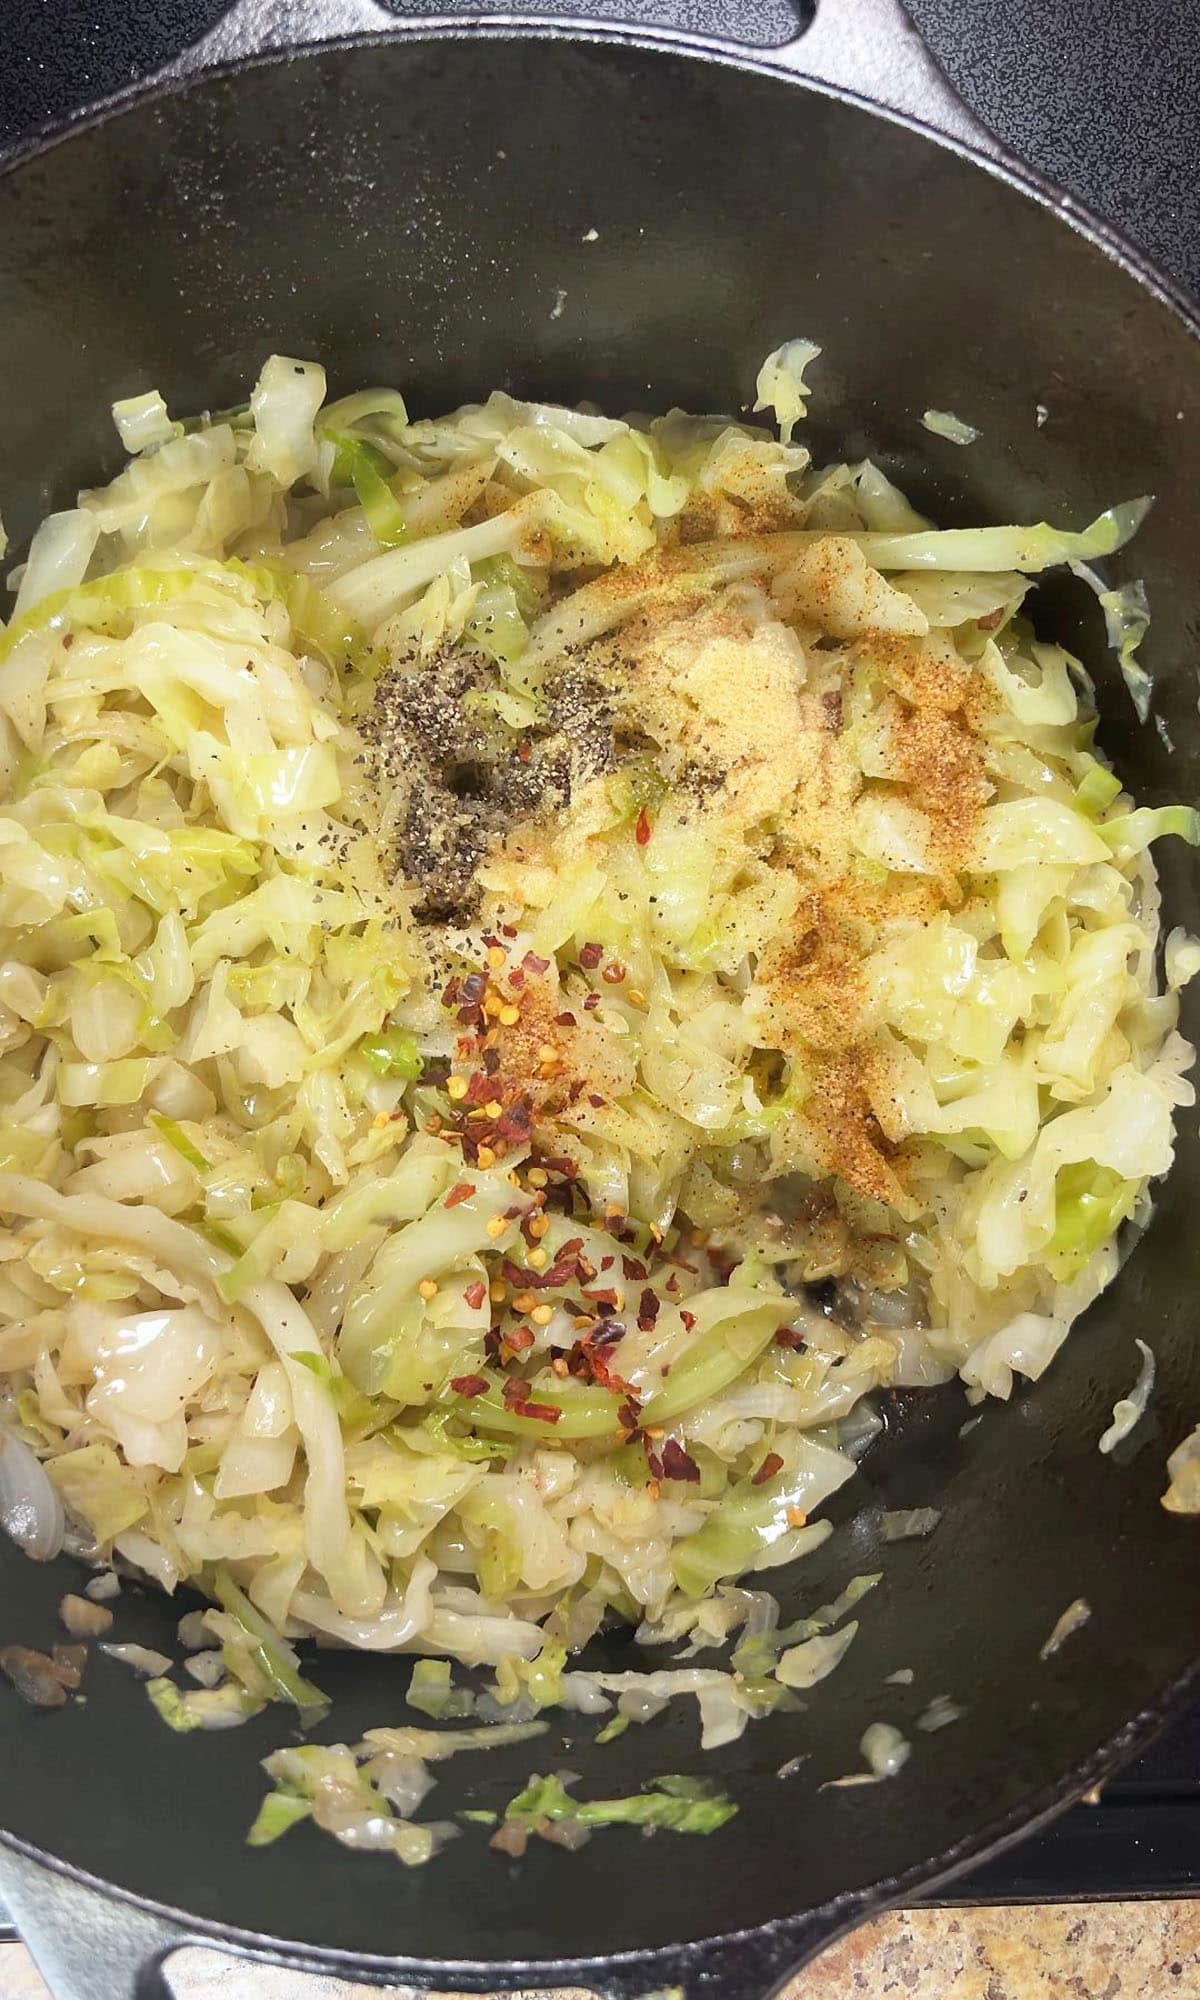 Cabbage and smoked sausage after the spices and apple cider vinegar have been added.